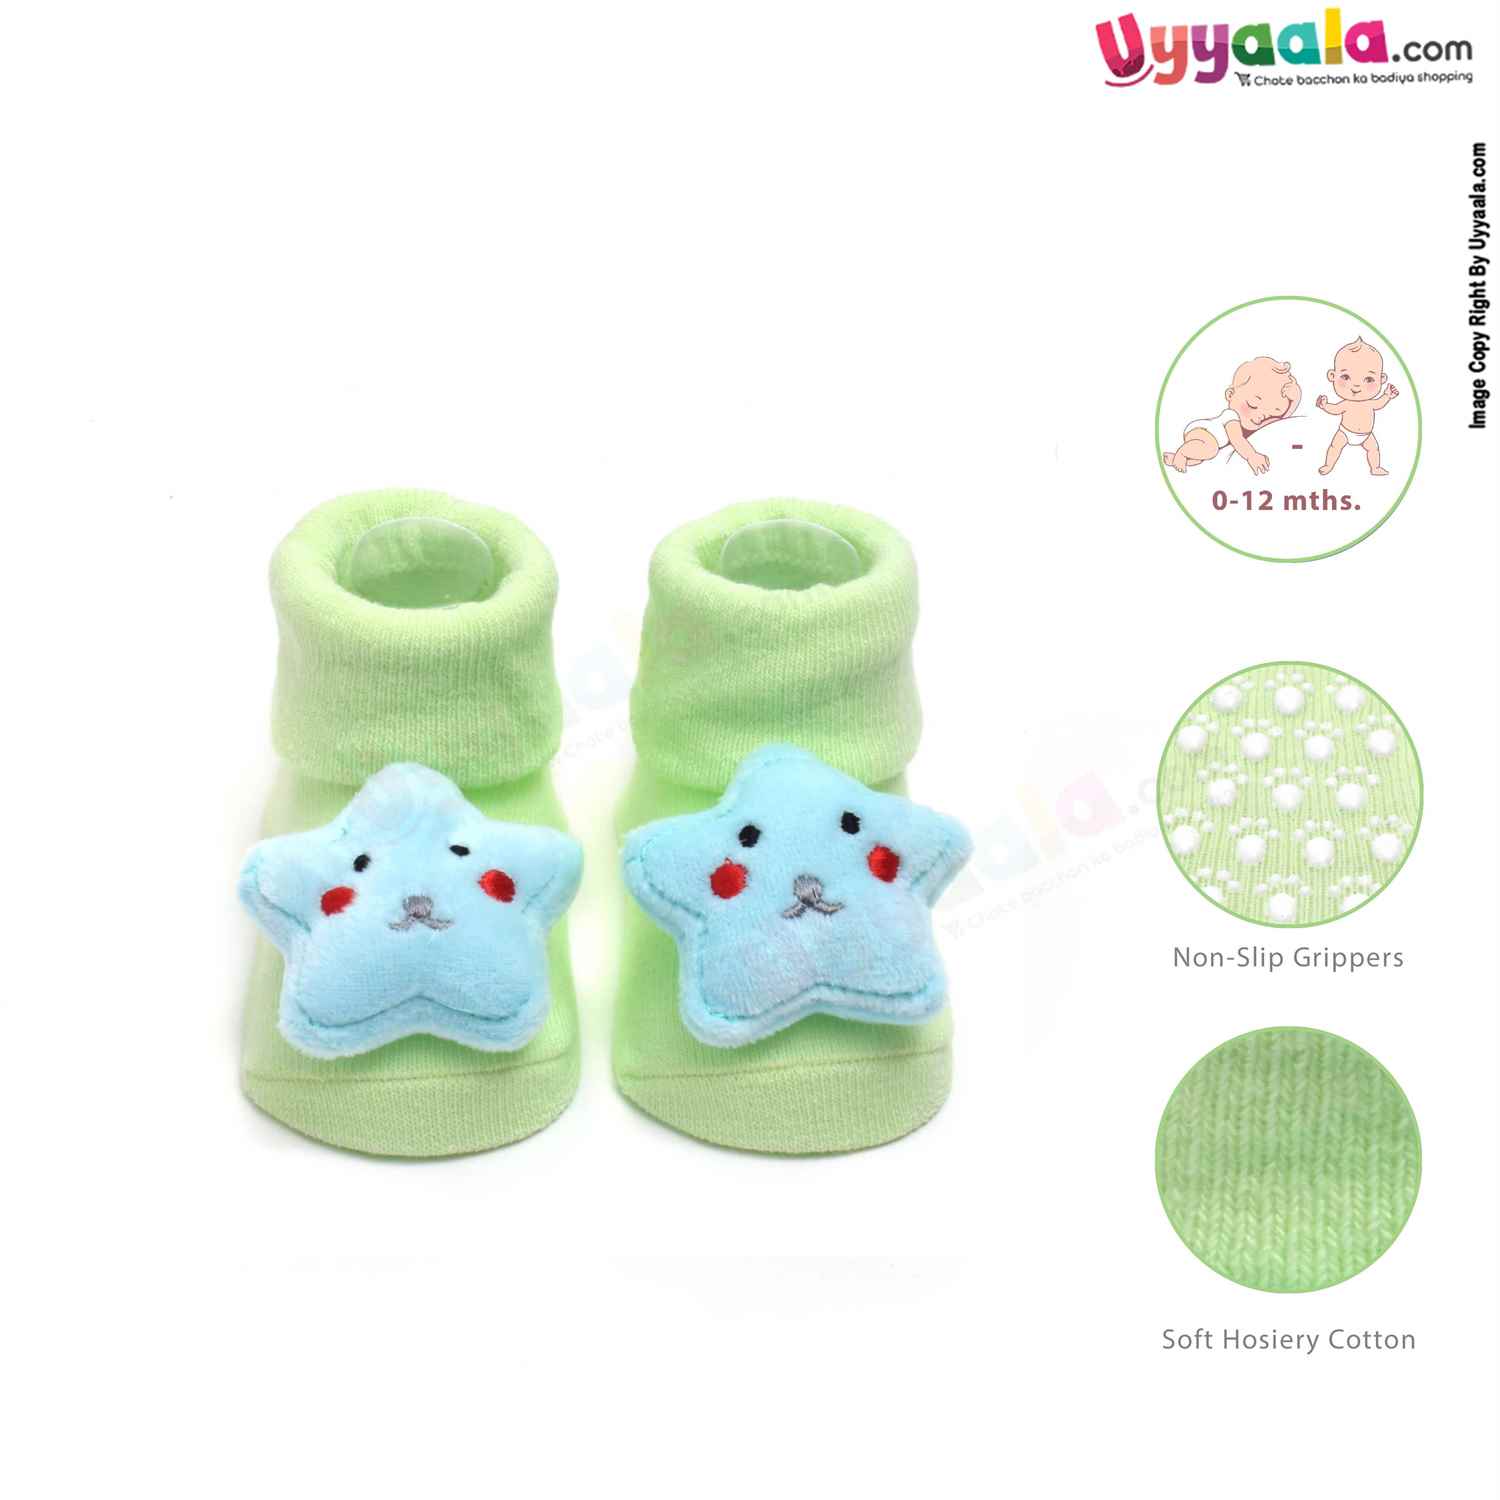 Hosiery Cotton Baby Socks with Star Character ,0 to 12m Age- Green